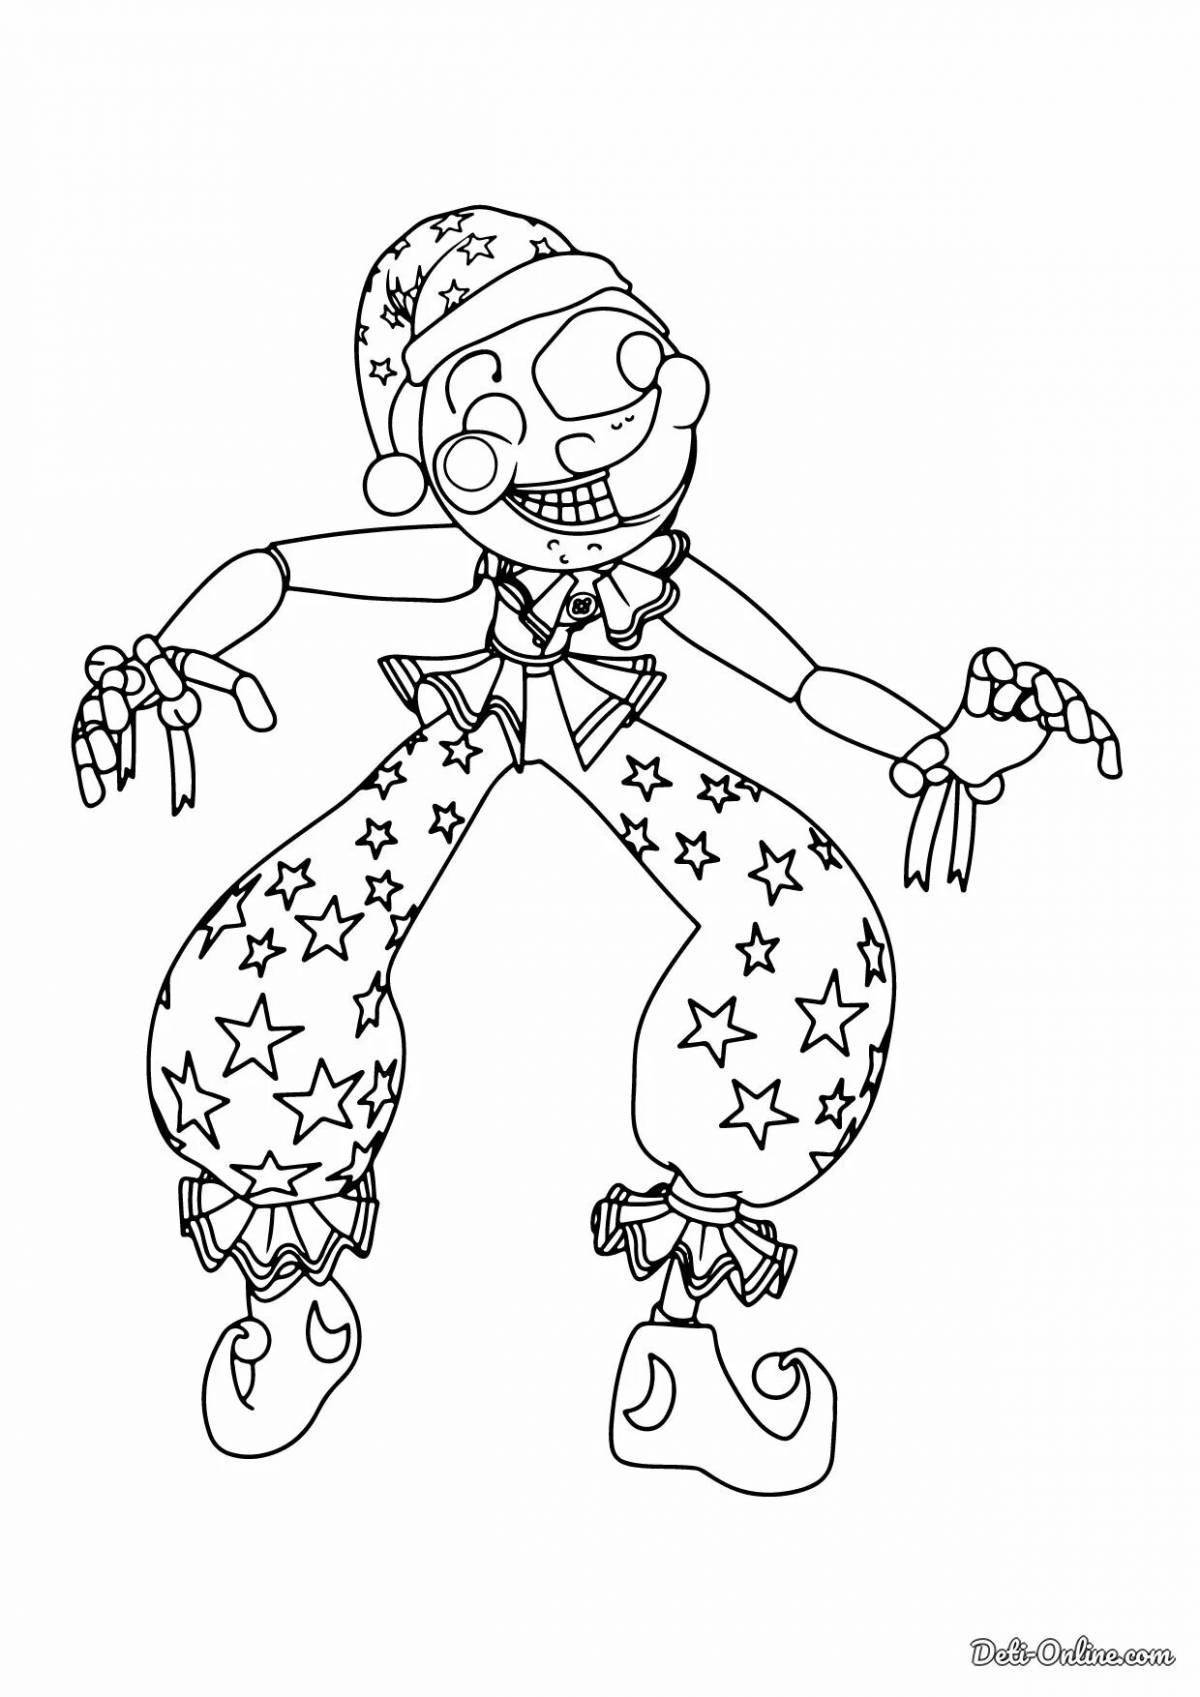 Coloring radiant sun and moon animatronics for kids